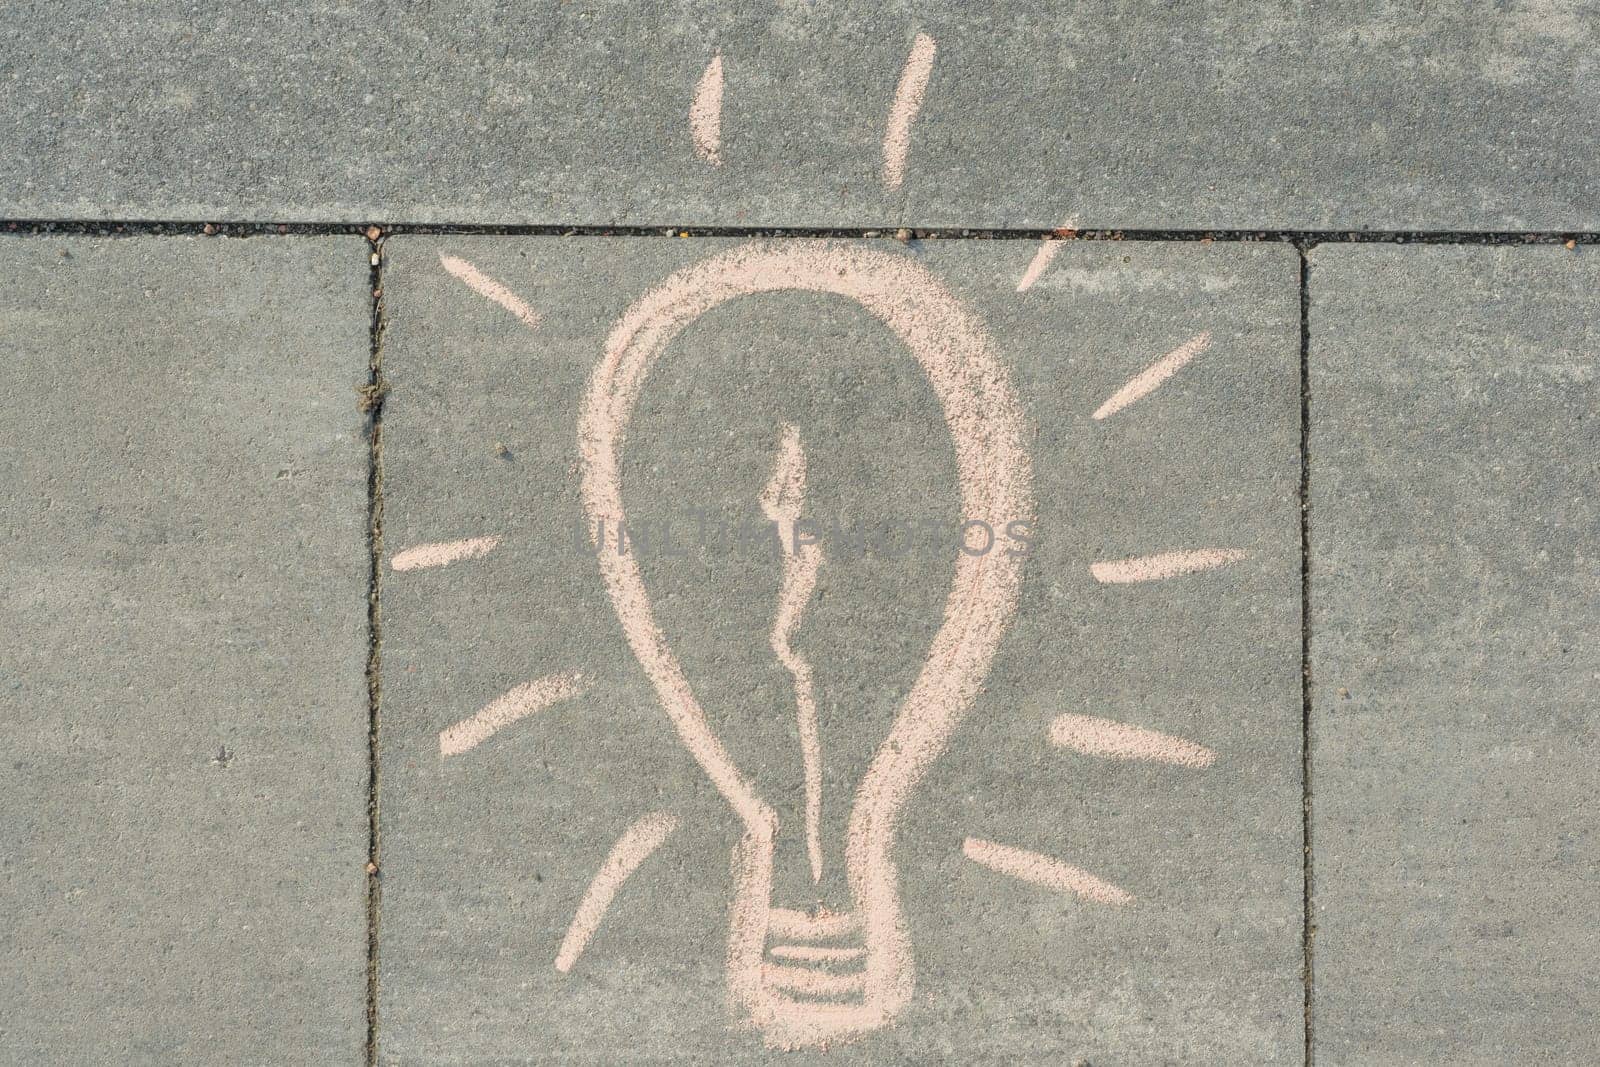 Abstract image drawing of light bulb written on grey sidewalk by VH-studio